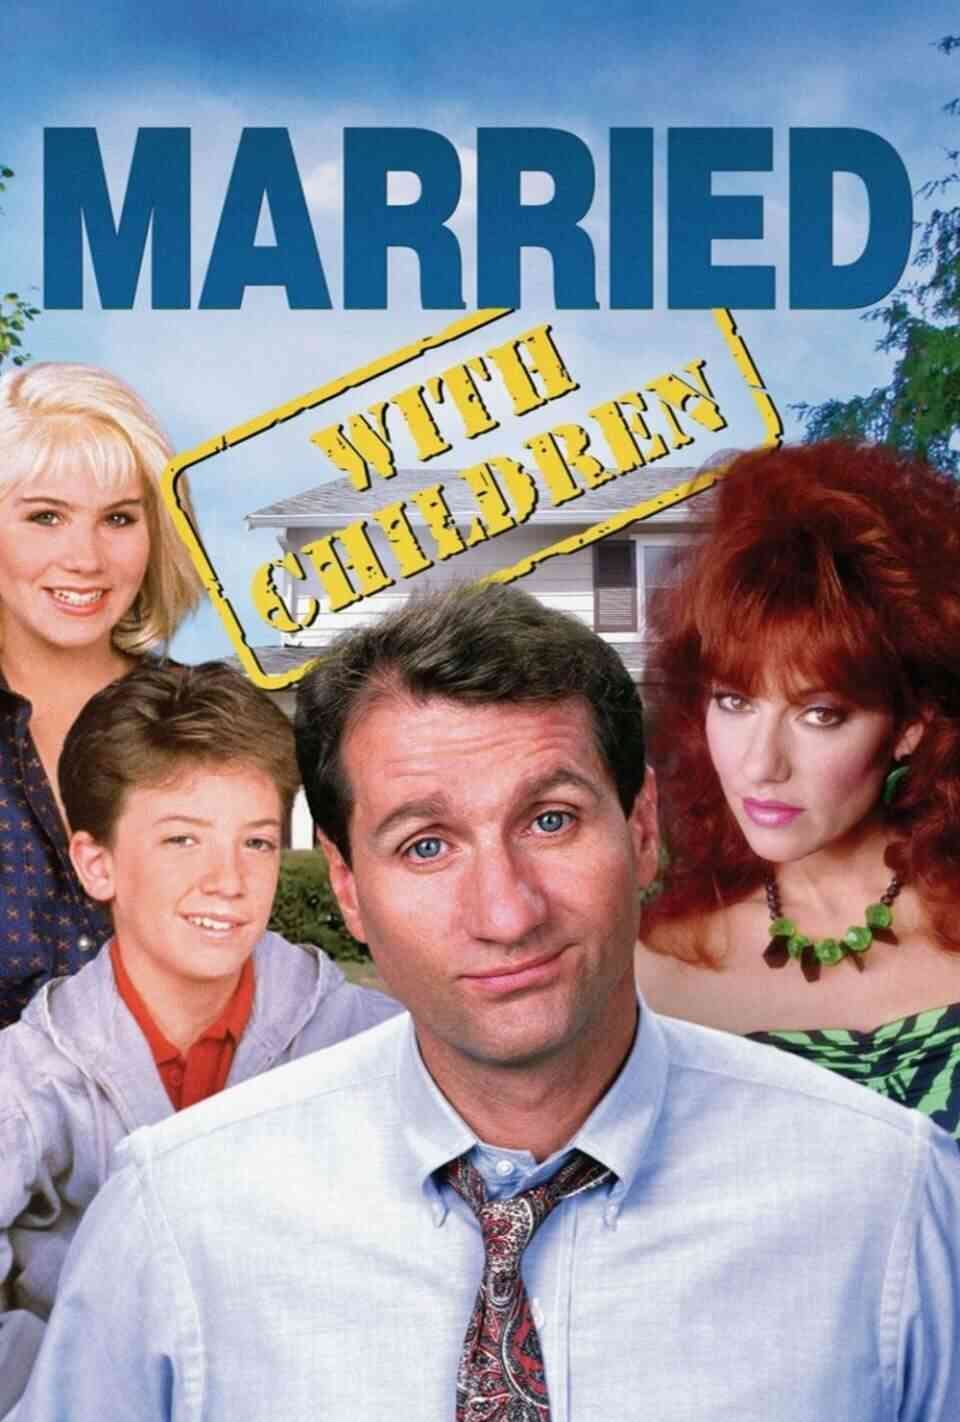 Read Married with Children screenplay (poster)